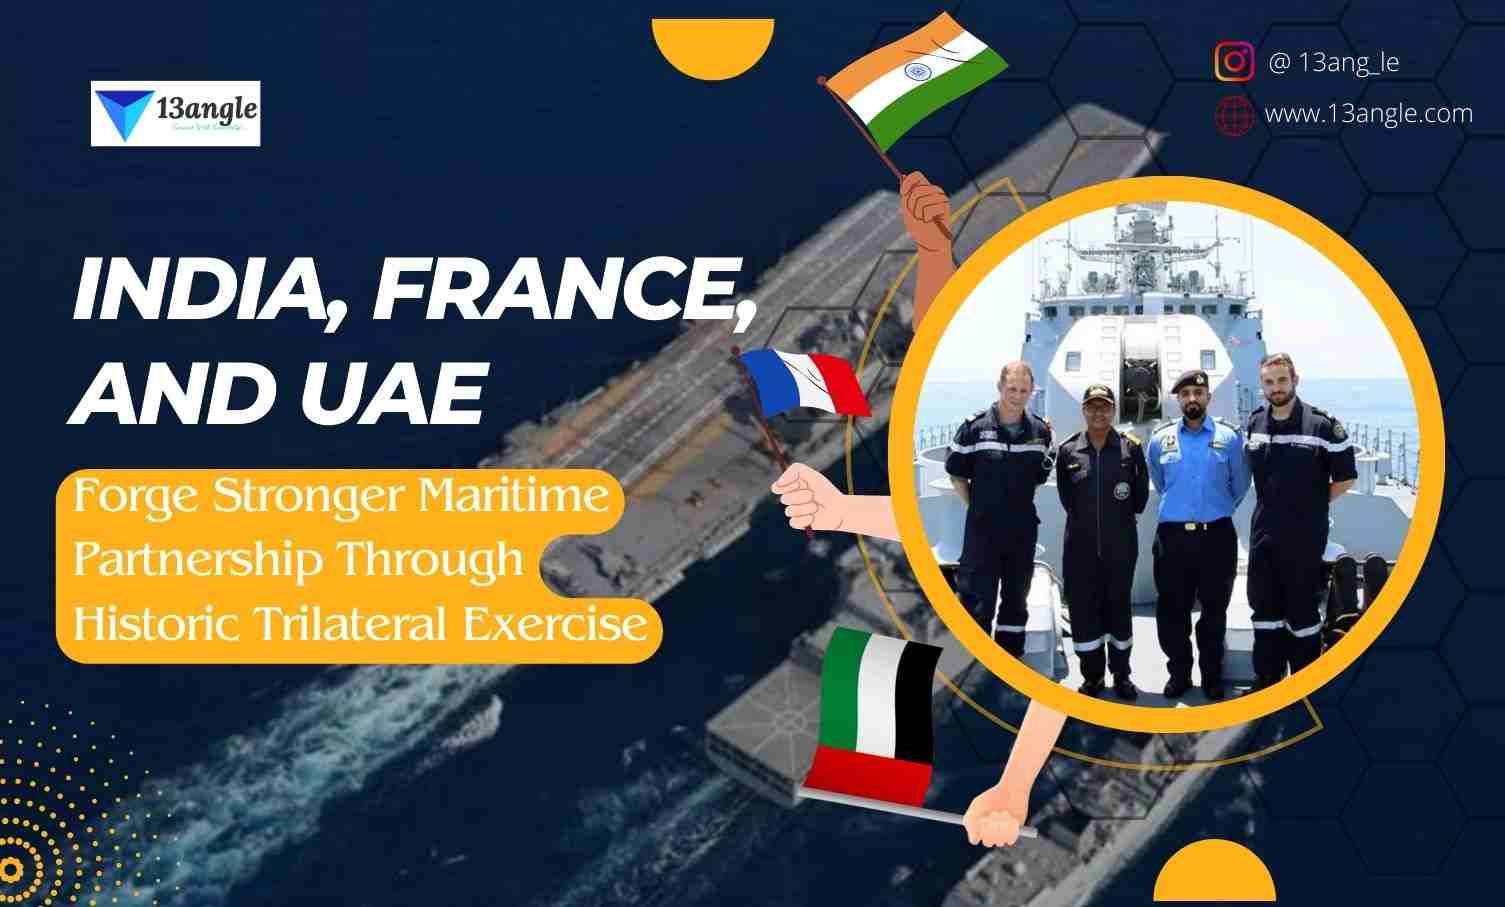 India, France, And UAE Forge Stronger Maritime Partnership Through Historic Trilateral Exercise- 13angle